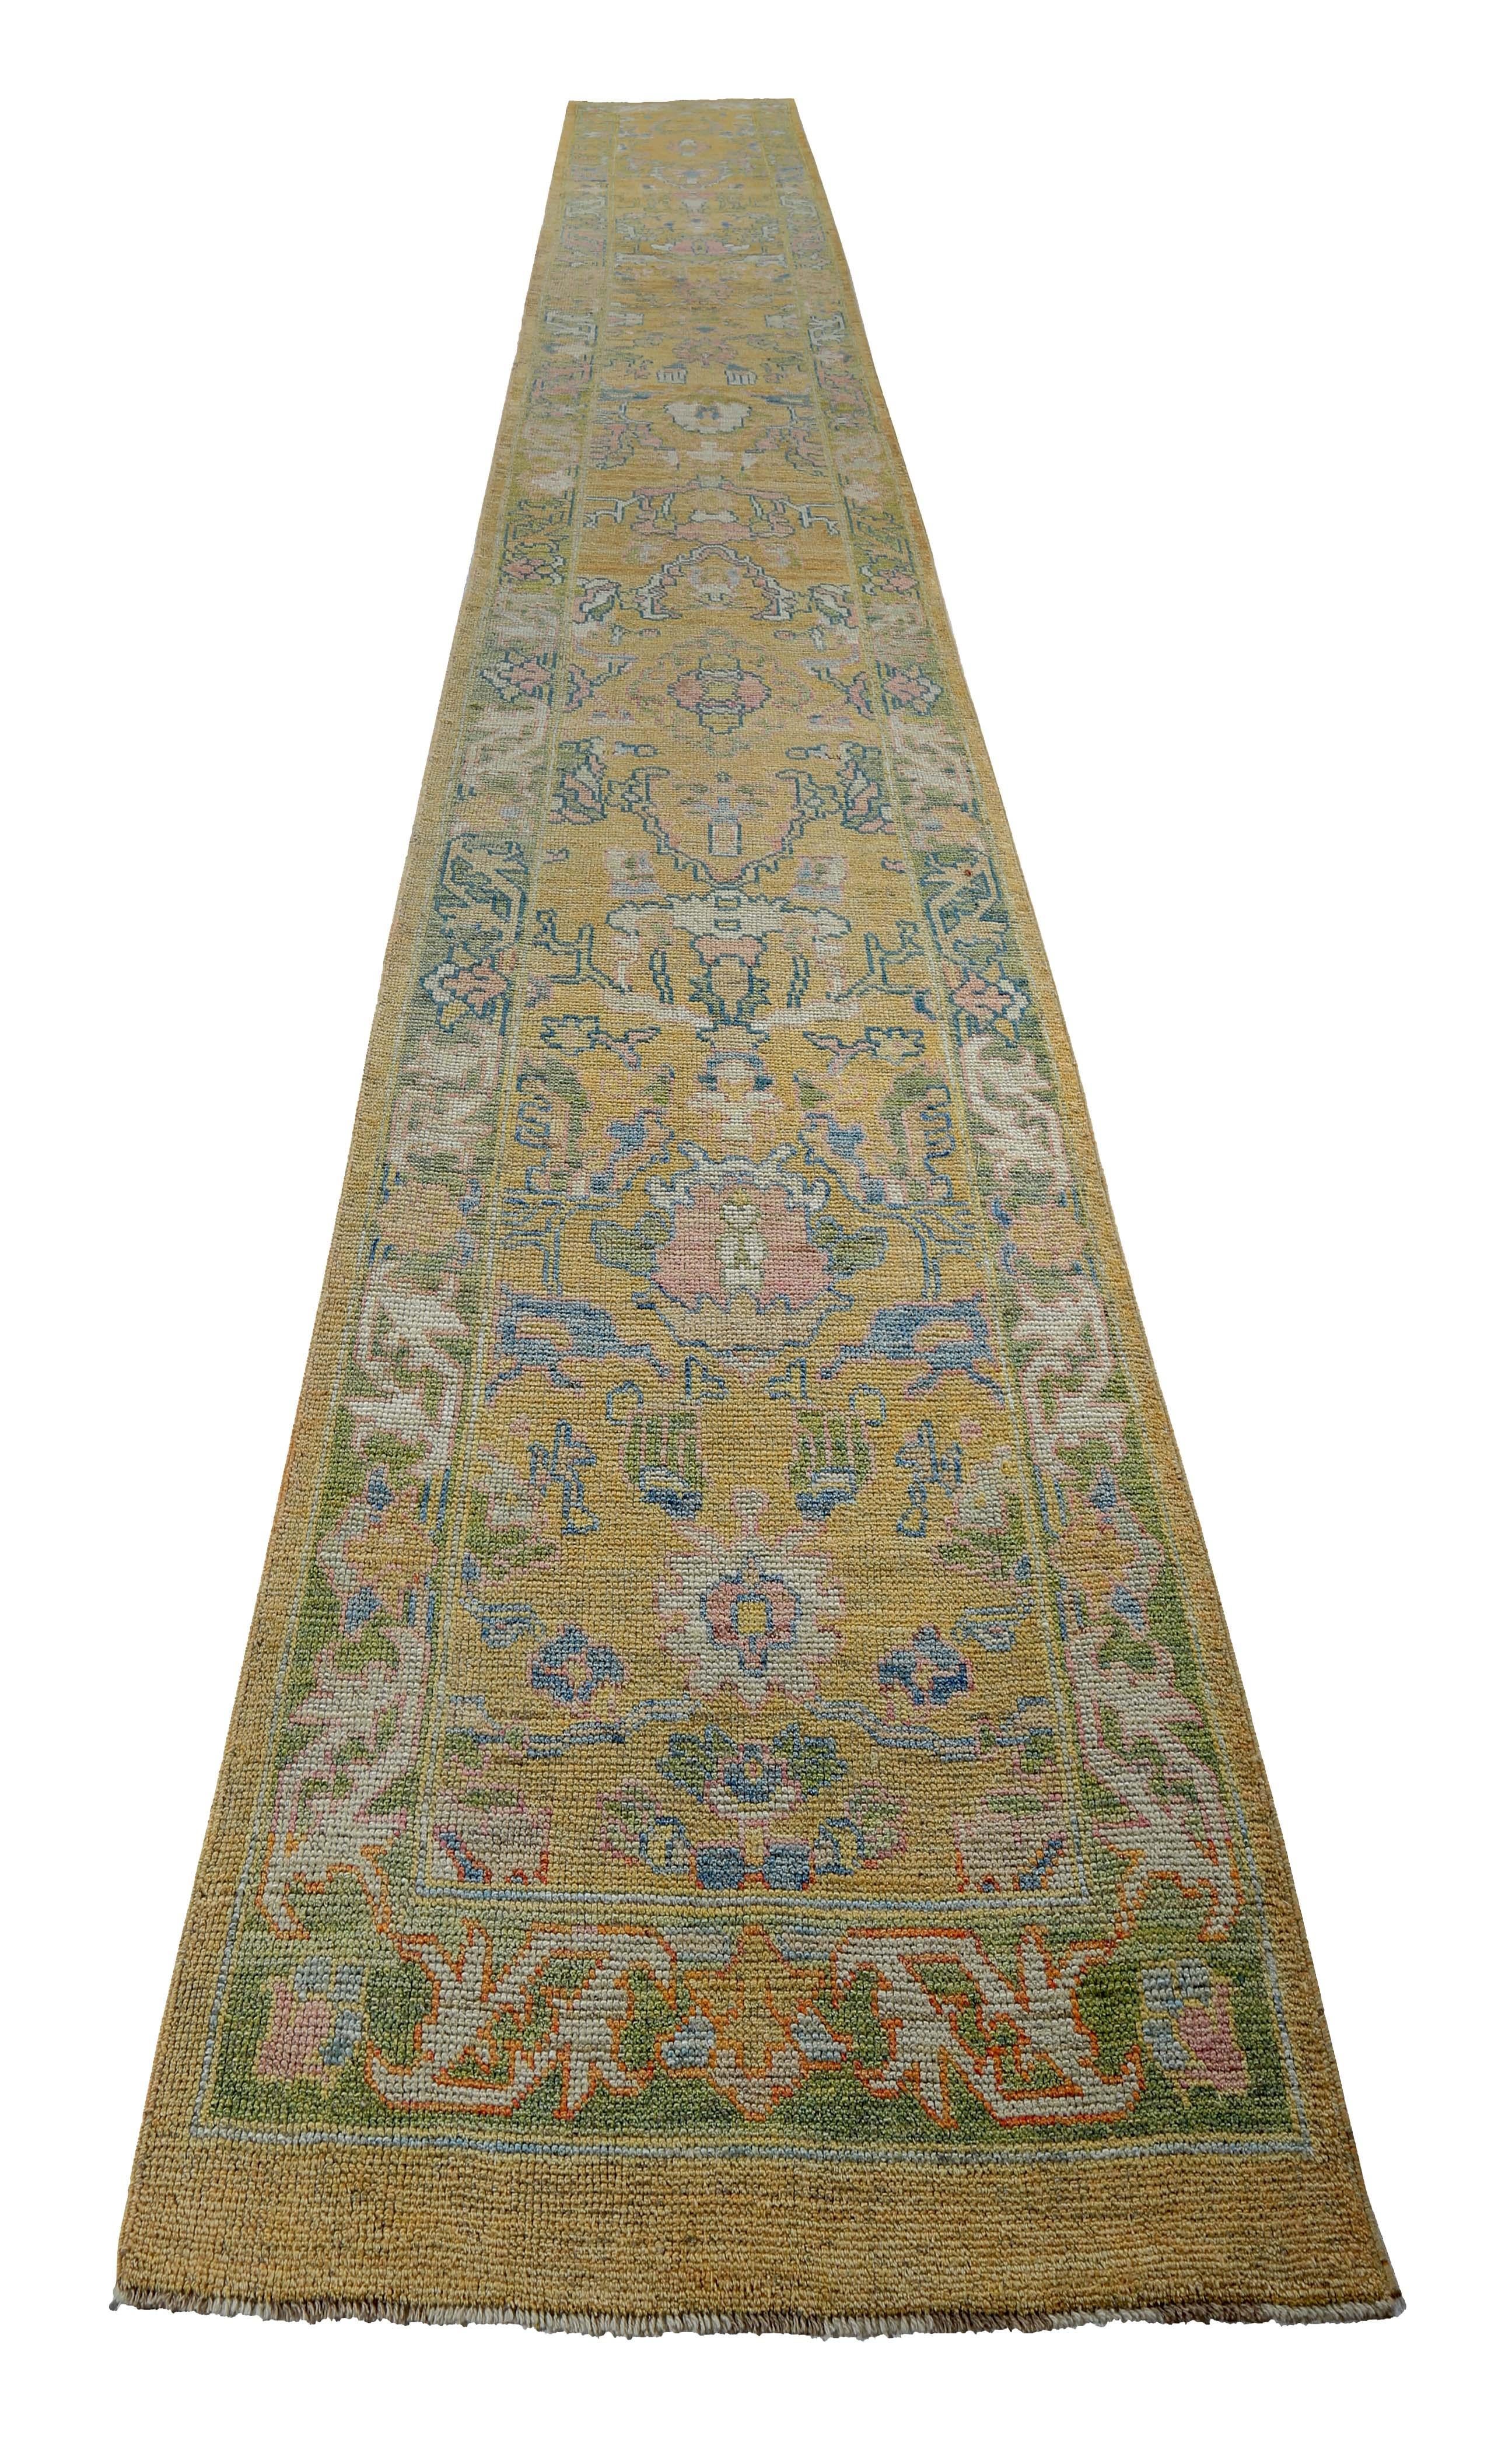 Turkish runner rug made of handwoven sheep’s wool of the finest quality. It’s colored with organic vegetable dyes that are certified safe for humans and pets alike. It features blue and pink floral details on a lovely golden yellow field. Flower